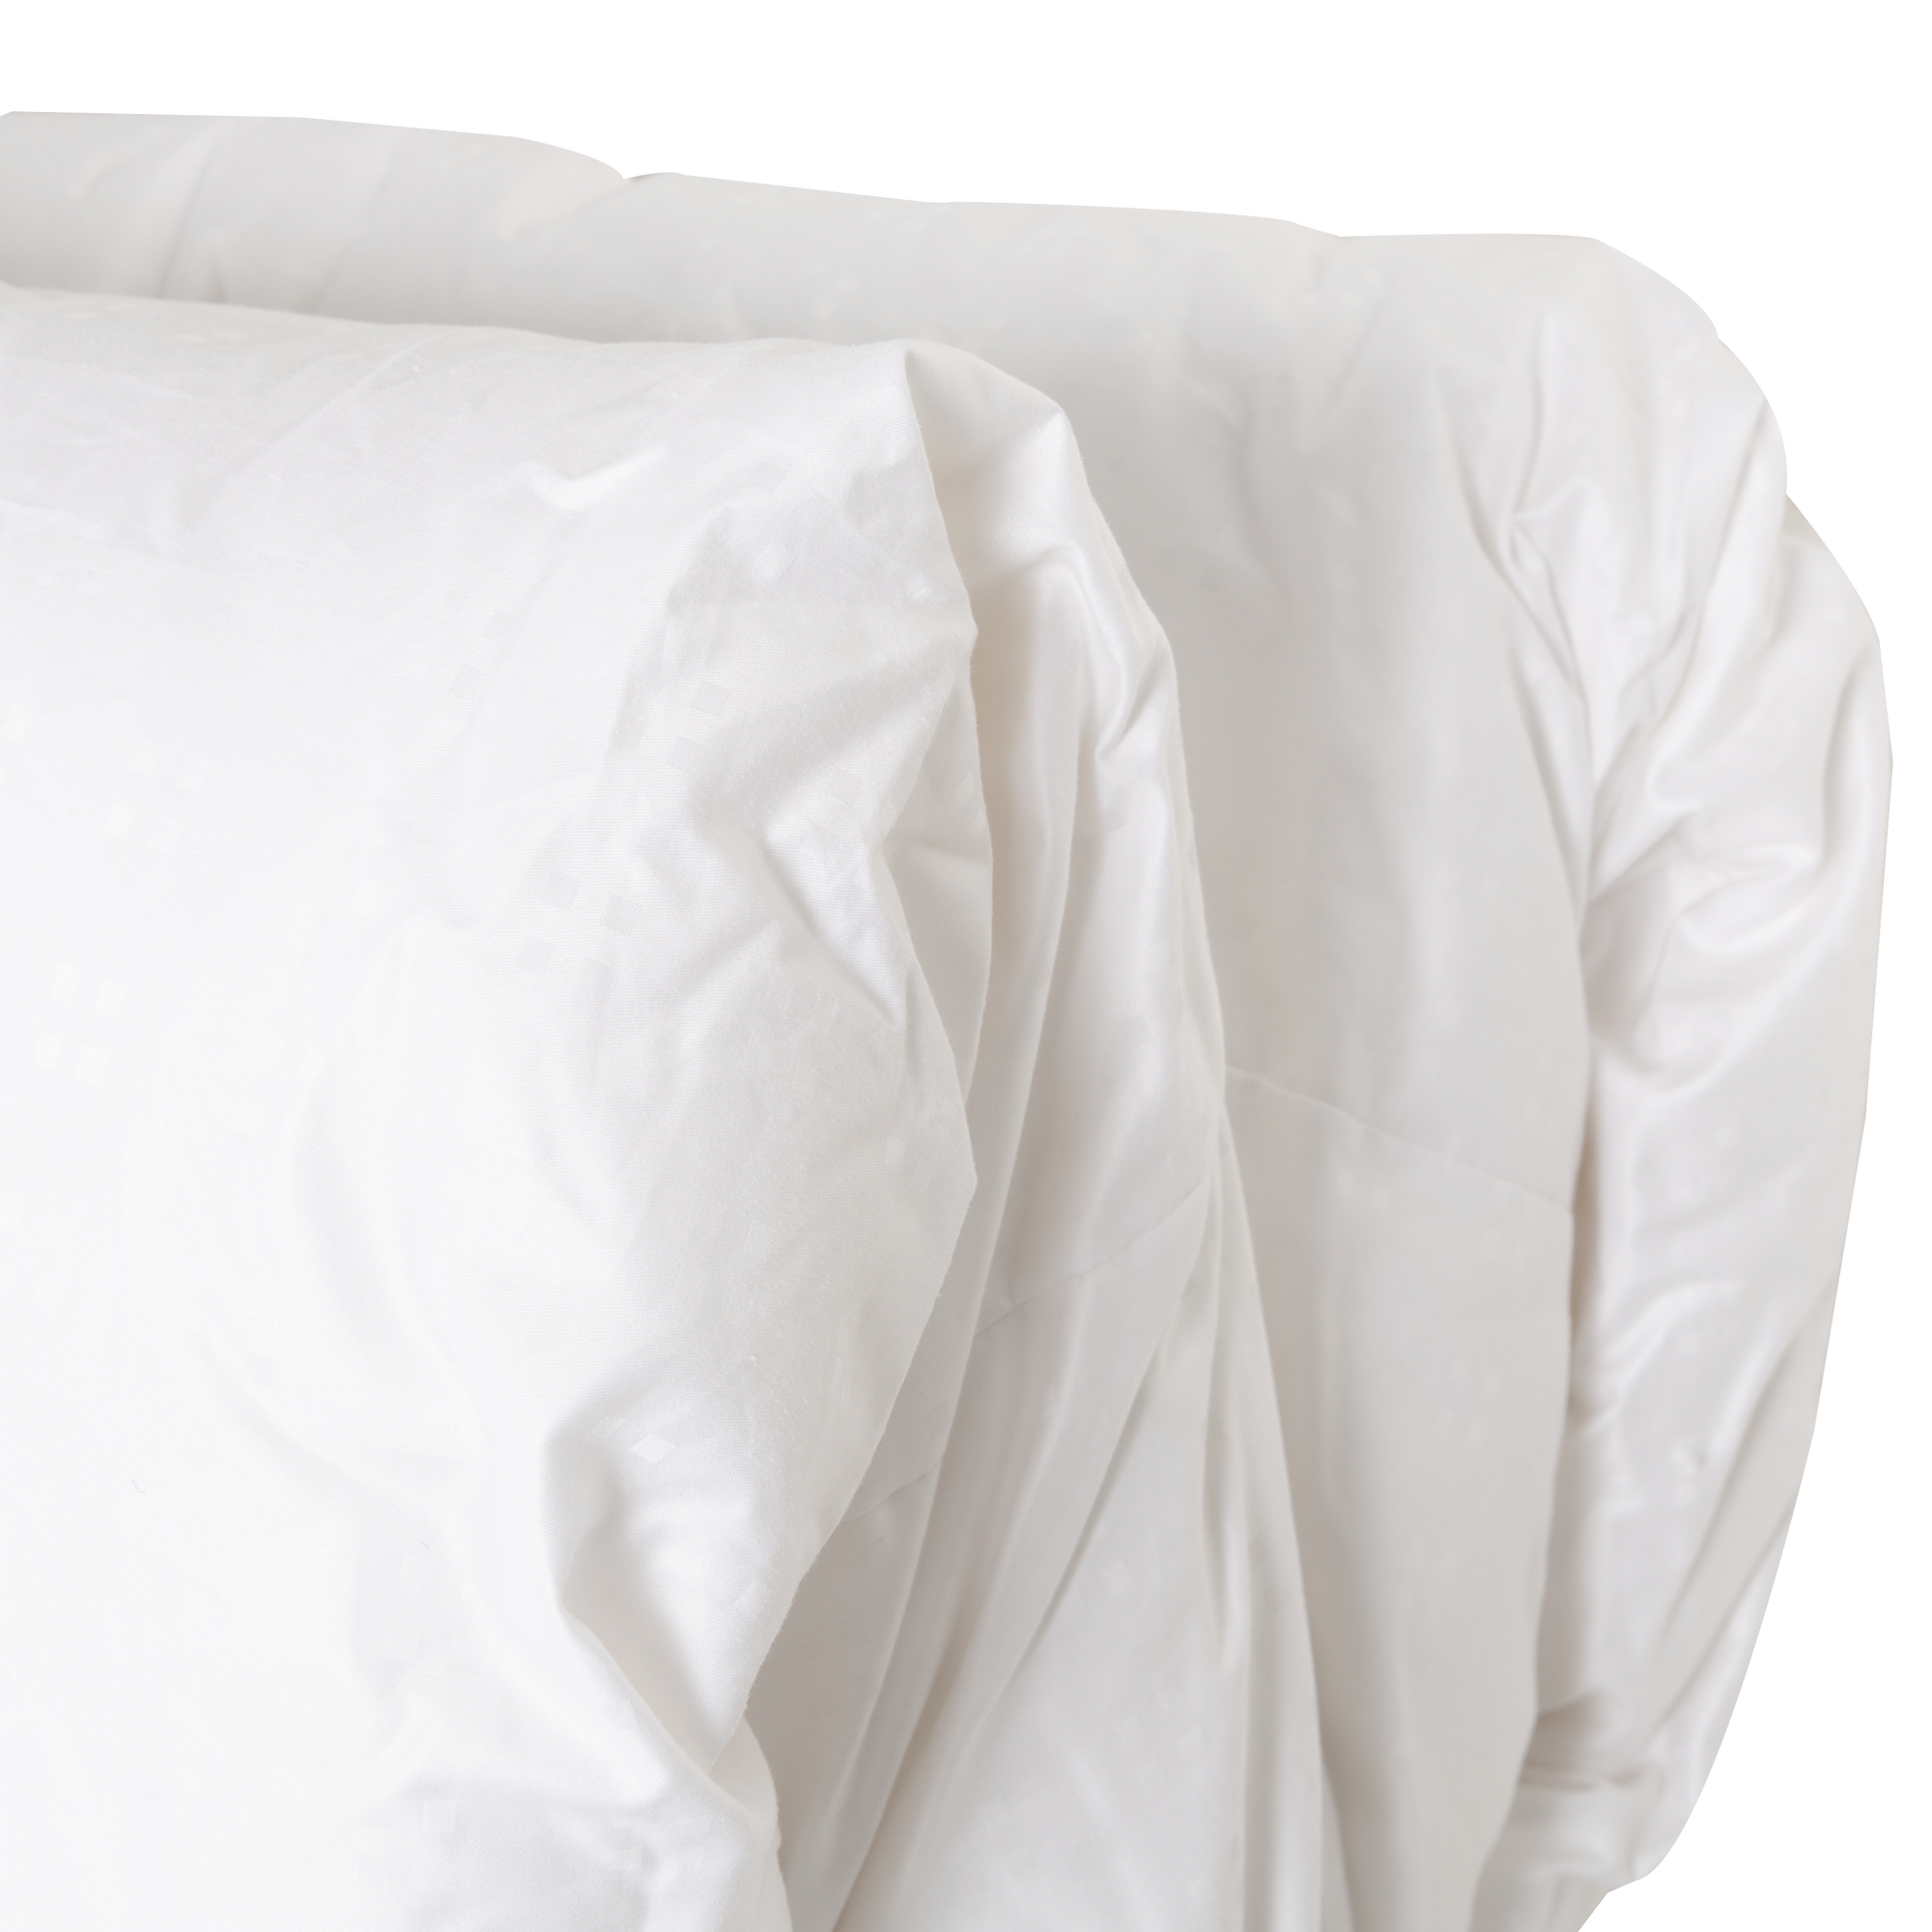 With humble beginnings as a small Canadian family business, St Genève has established itself as a fine maker of quality and luxurious duvets and pillows.